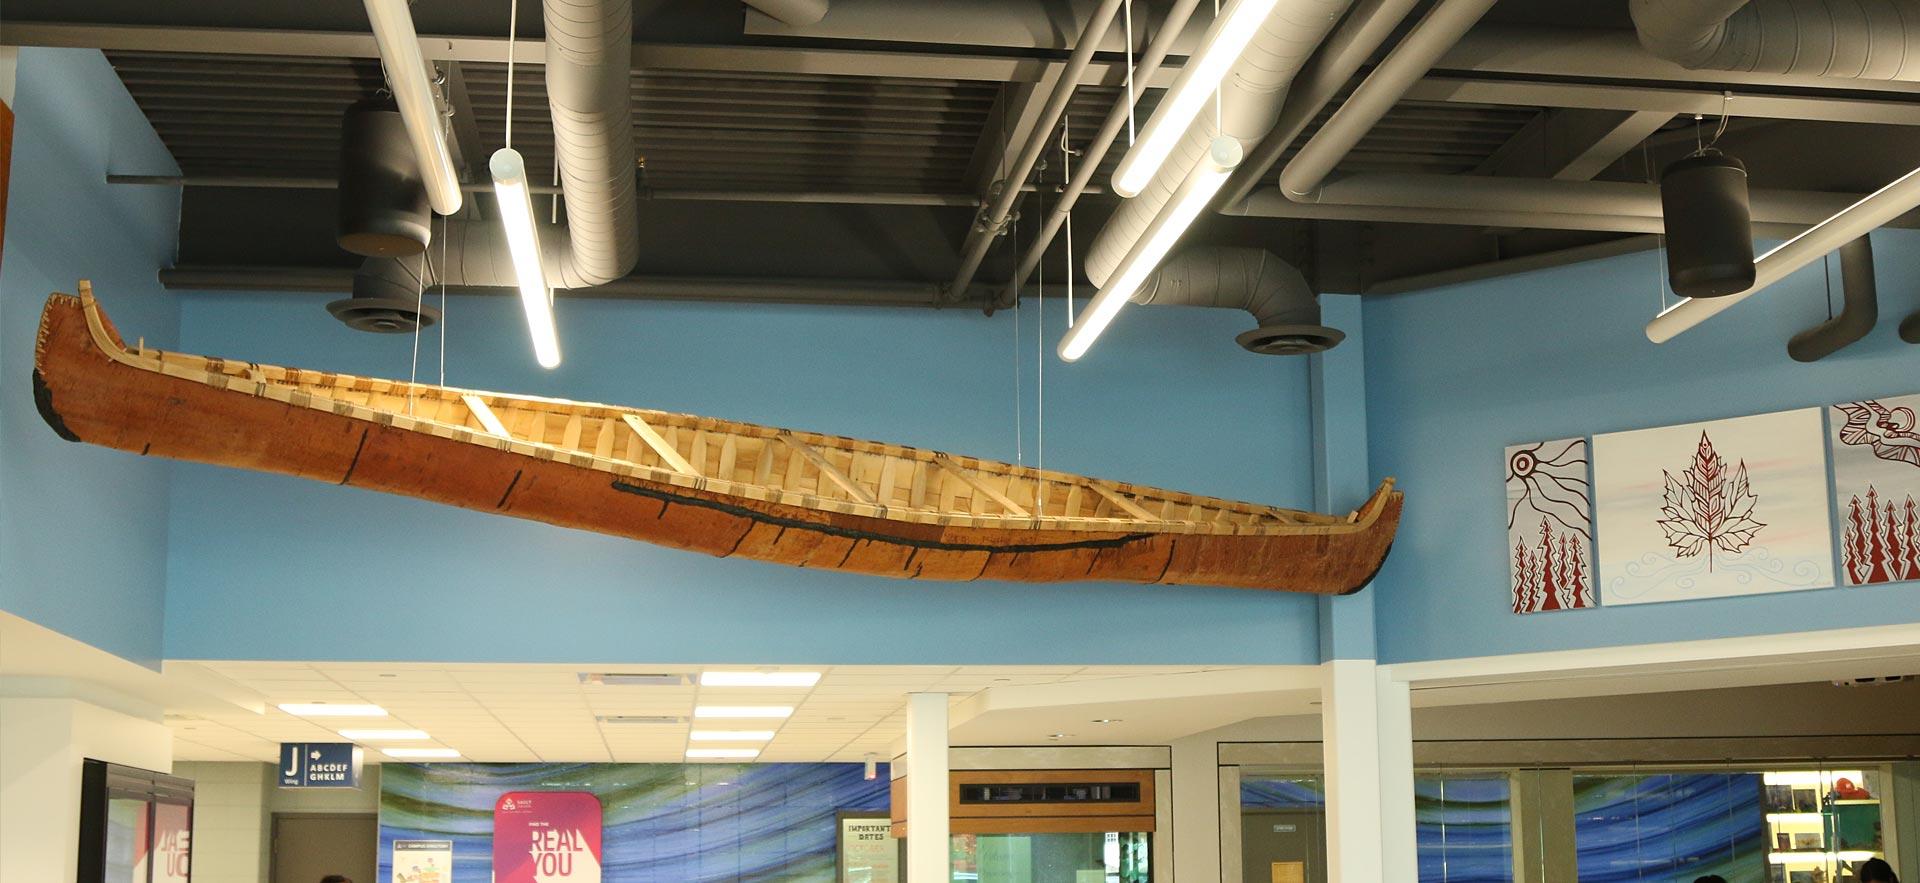 Sault College entrance that displays indigenous items. 